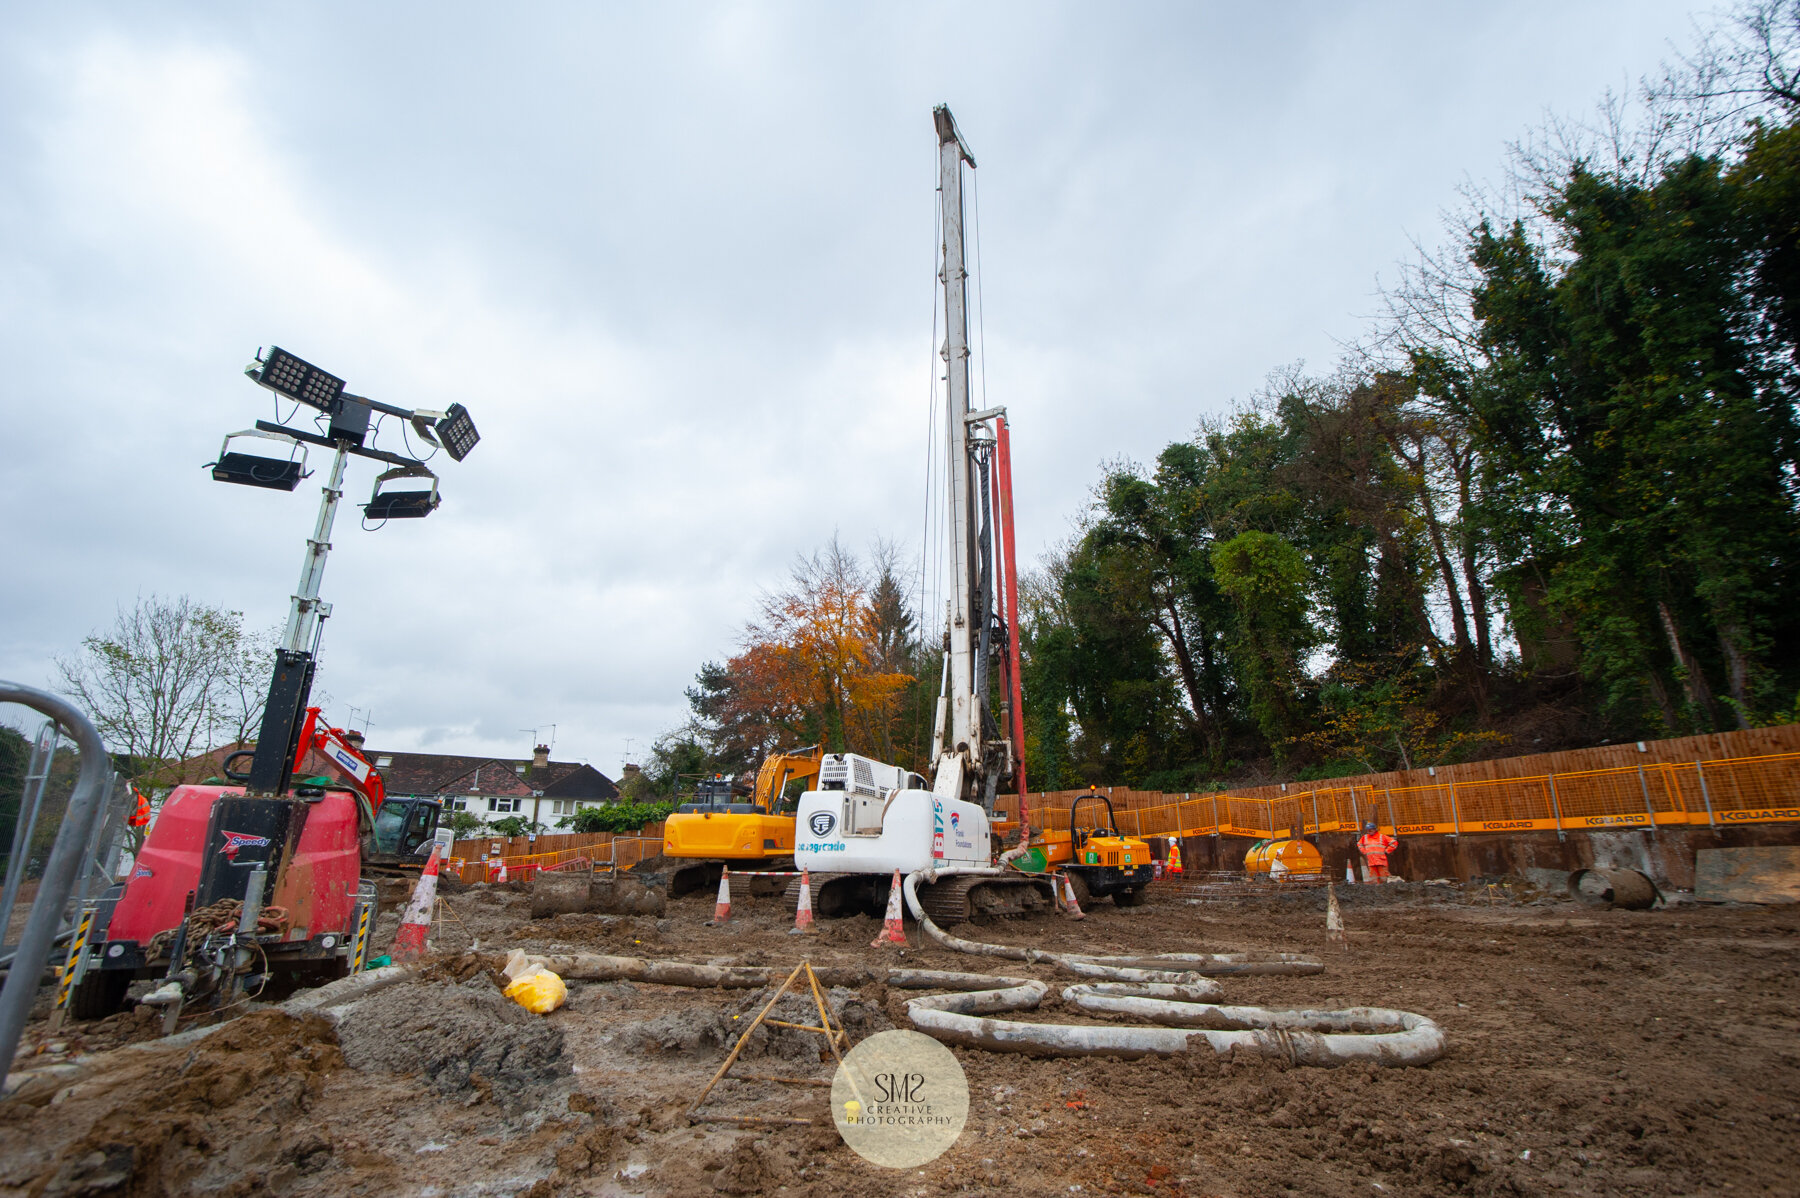  The other piling rig completing the process of the auger drilling the holes for the concrete to be pumped into the hole, then the steel ‘cages’ are pushed in. 